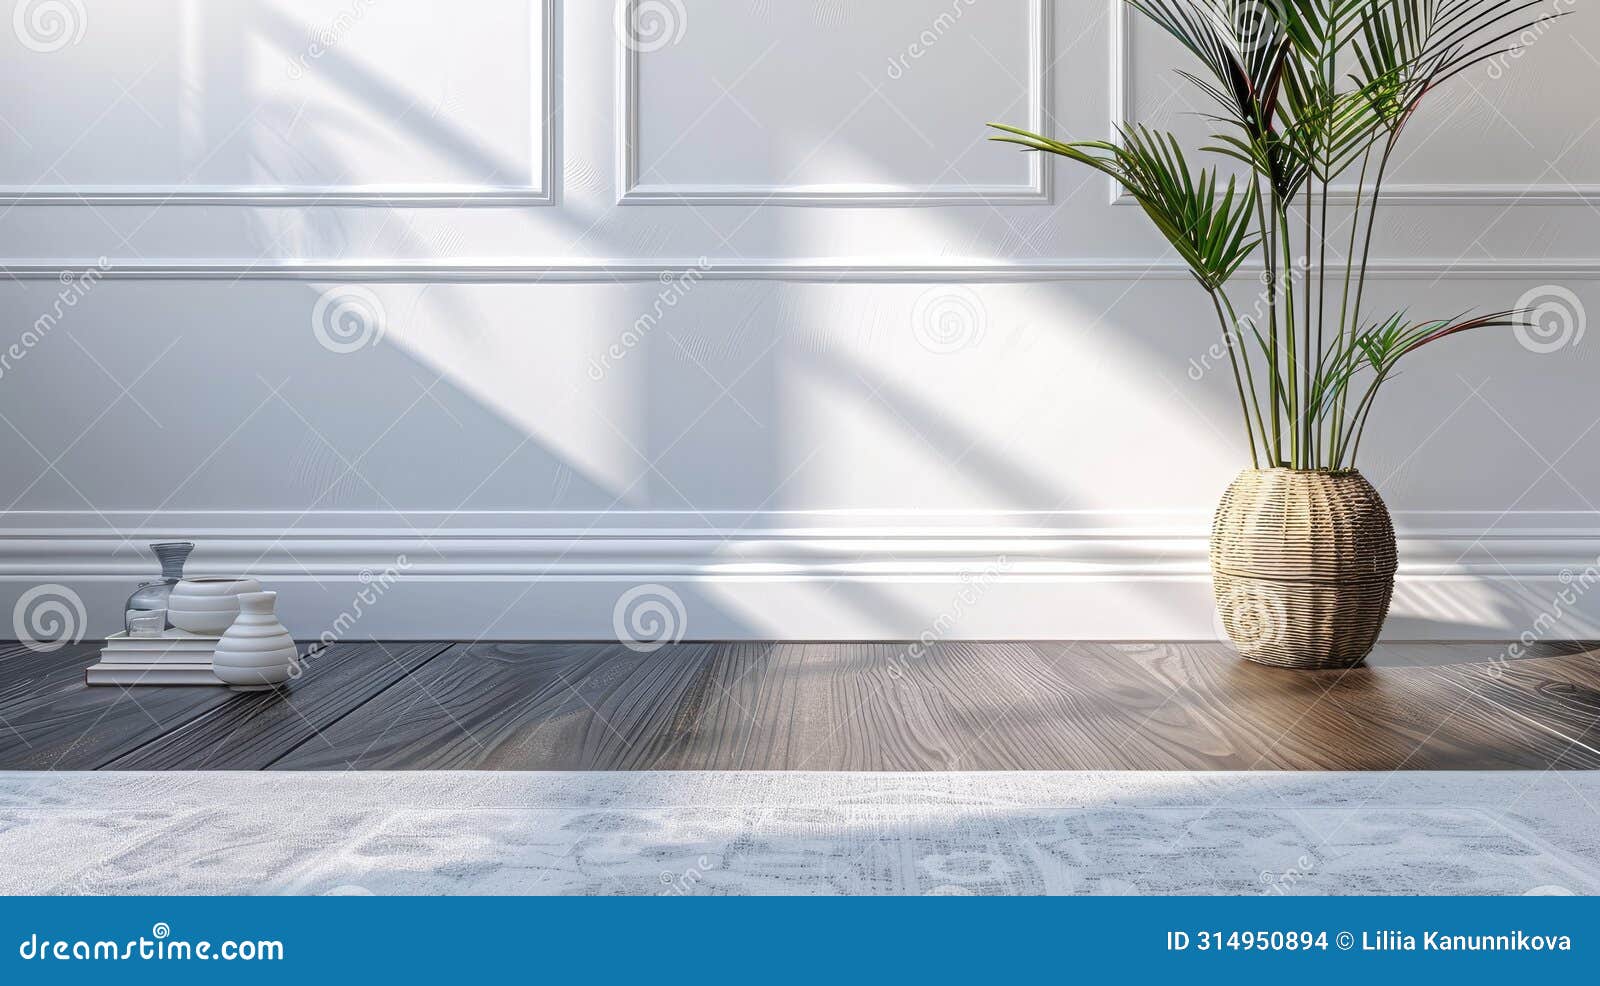 a baseboard color in crema or white, adding a touch of sophistication to interior .